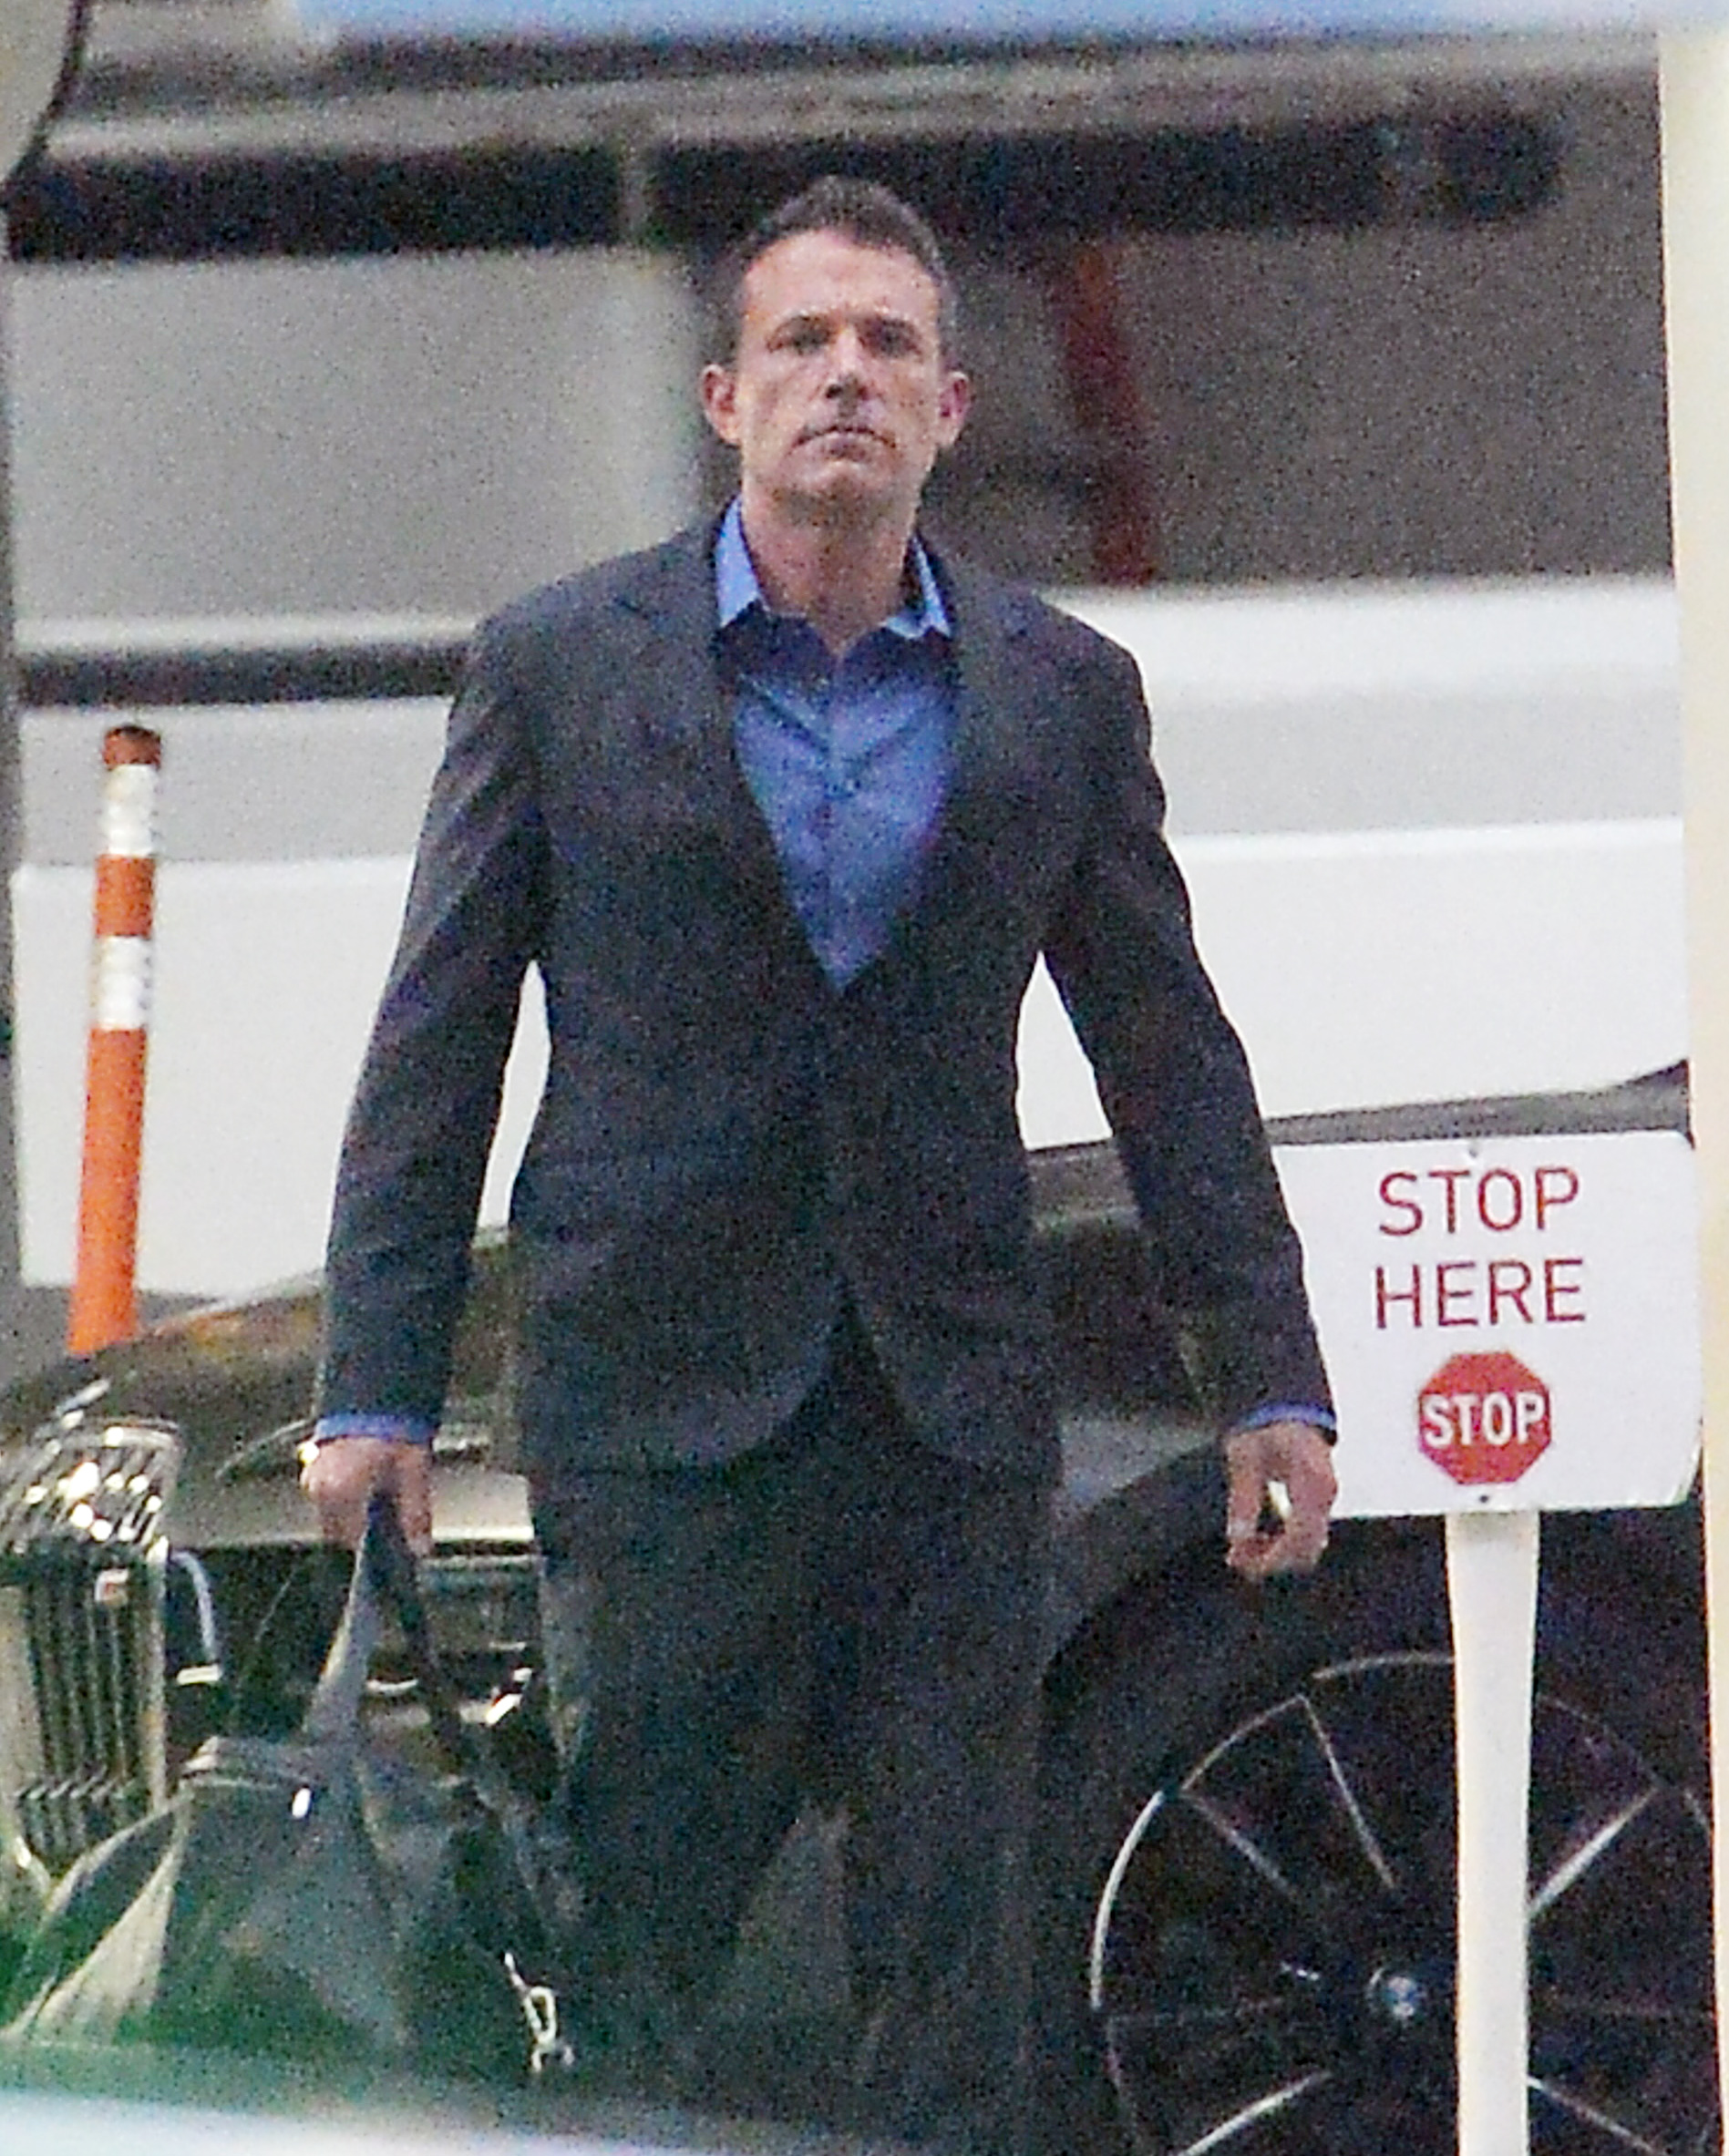 Meanwhile, Ben Affleck was spotted in Los Angeles amid speculation that they have split